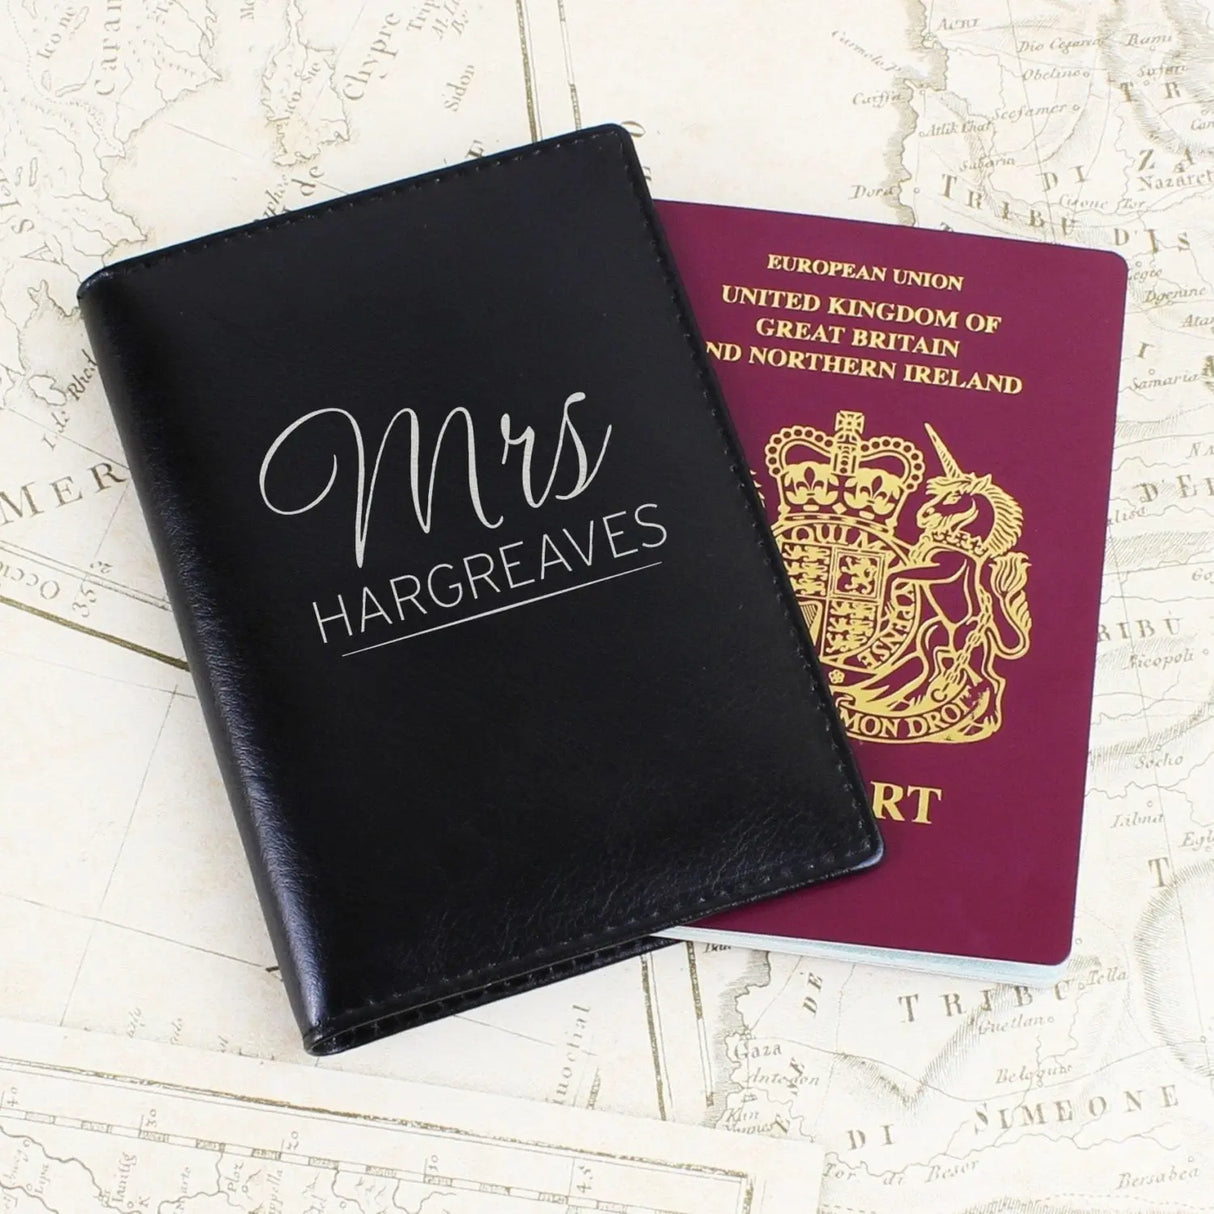 Personalised MR & MRS Black Leather Passport Set - Gift Moments